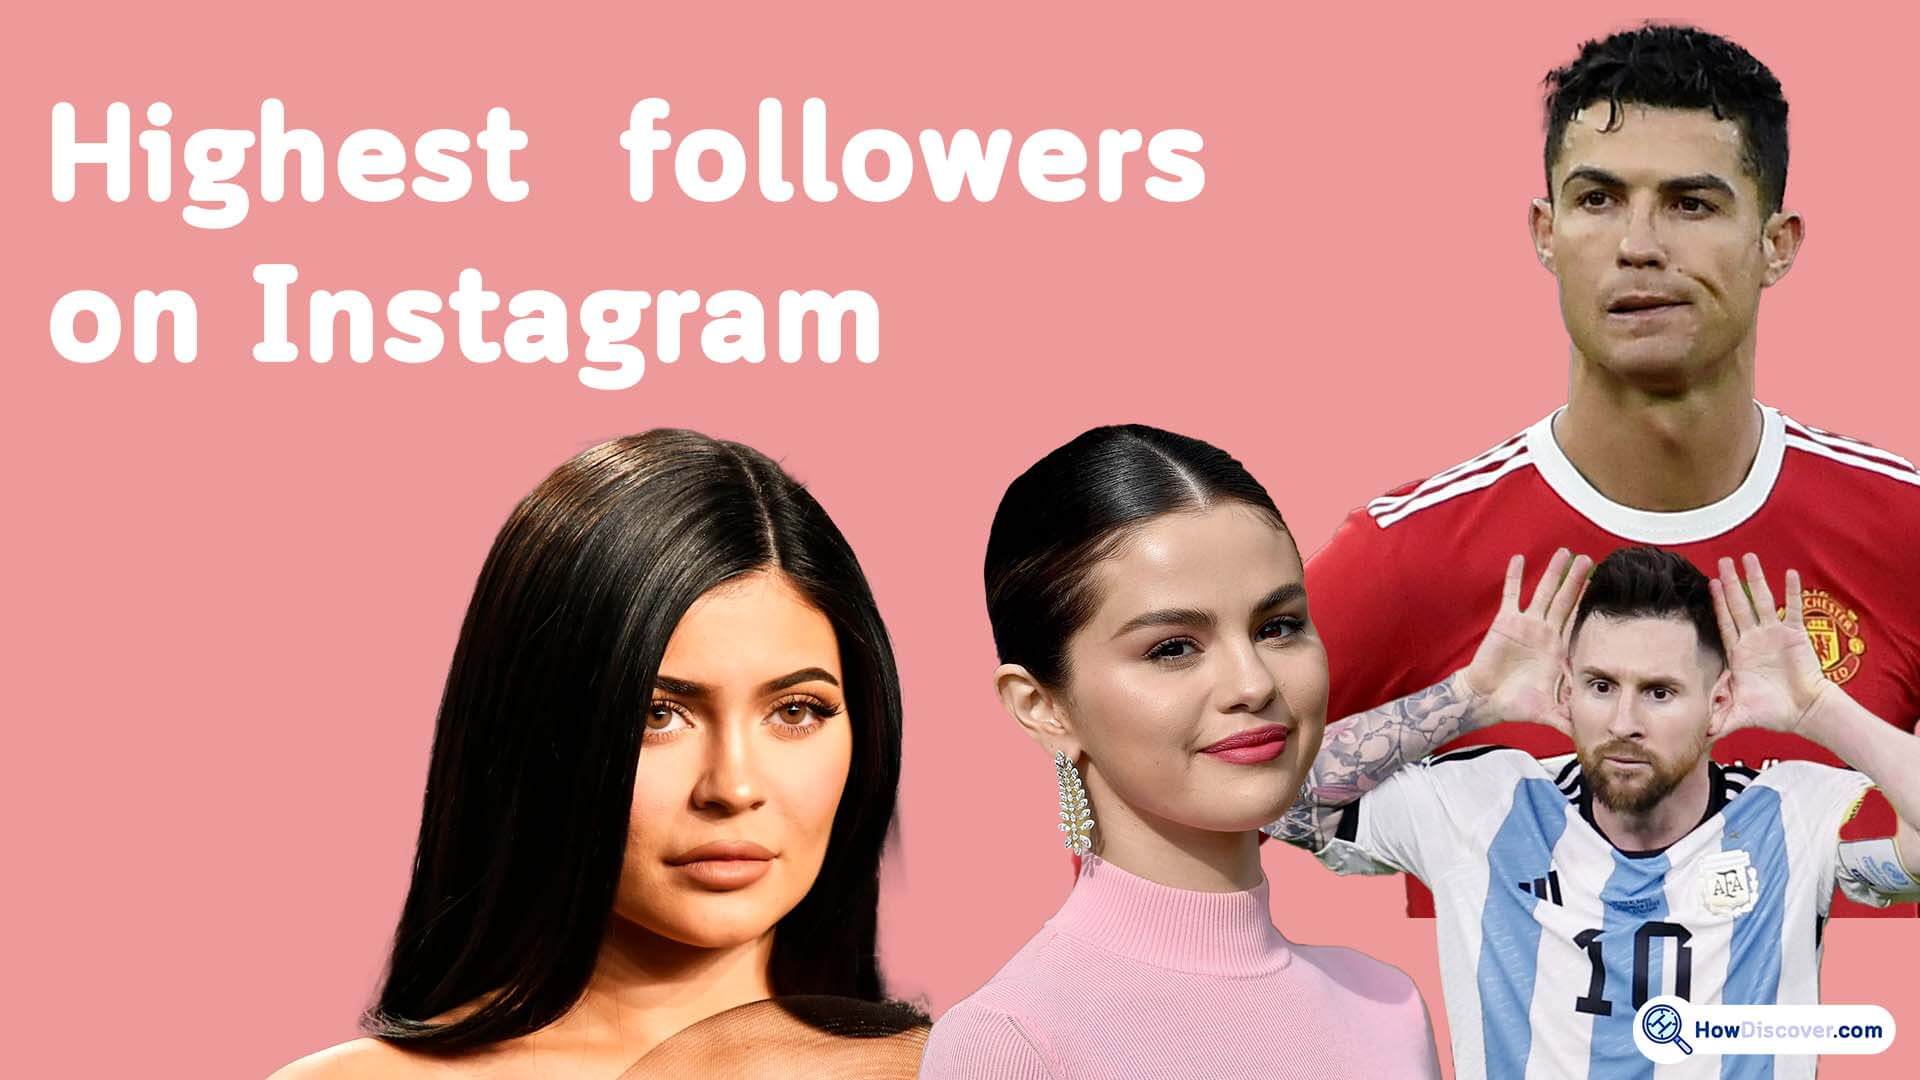 Who has the highest number of followers on Instagram?